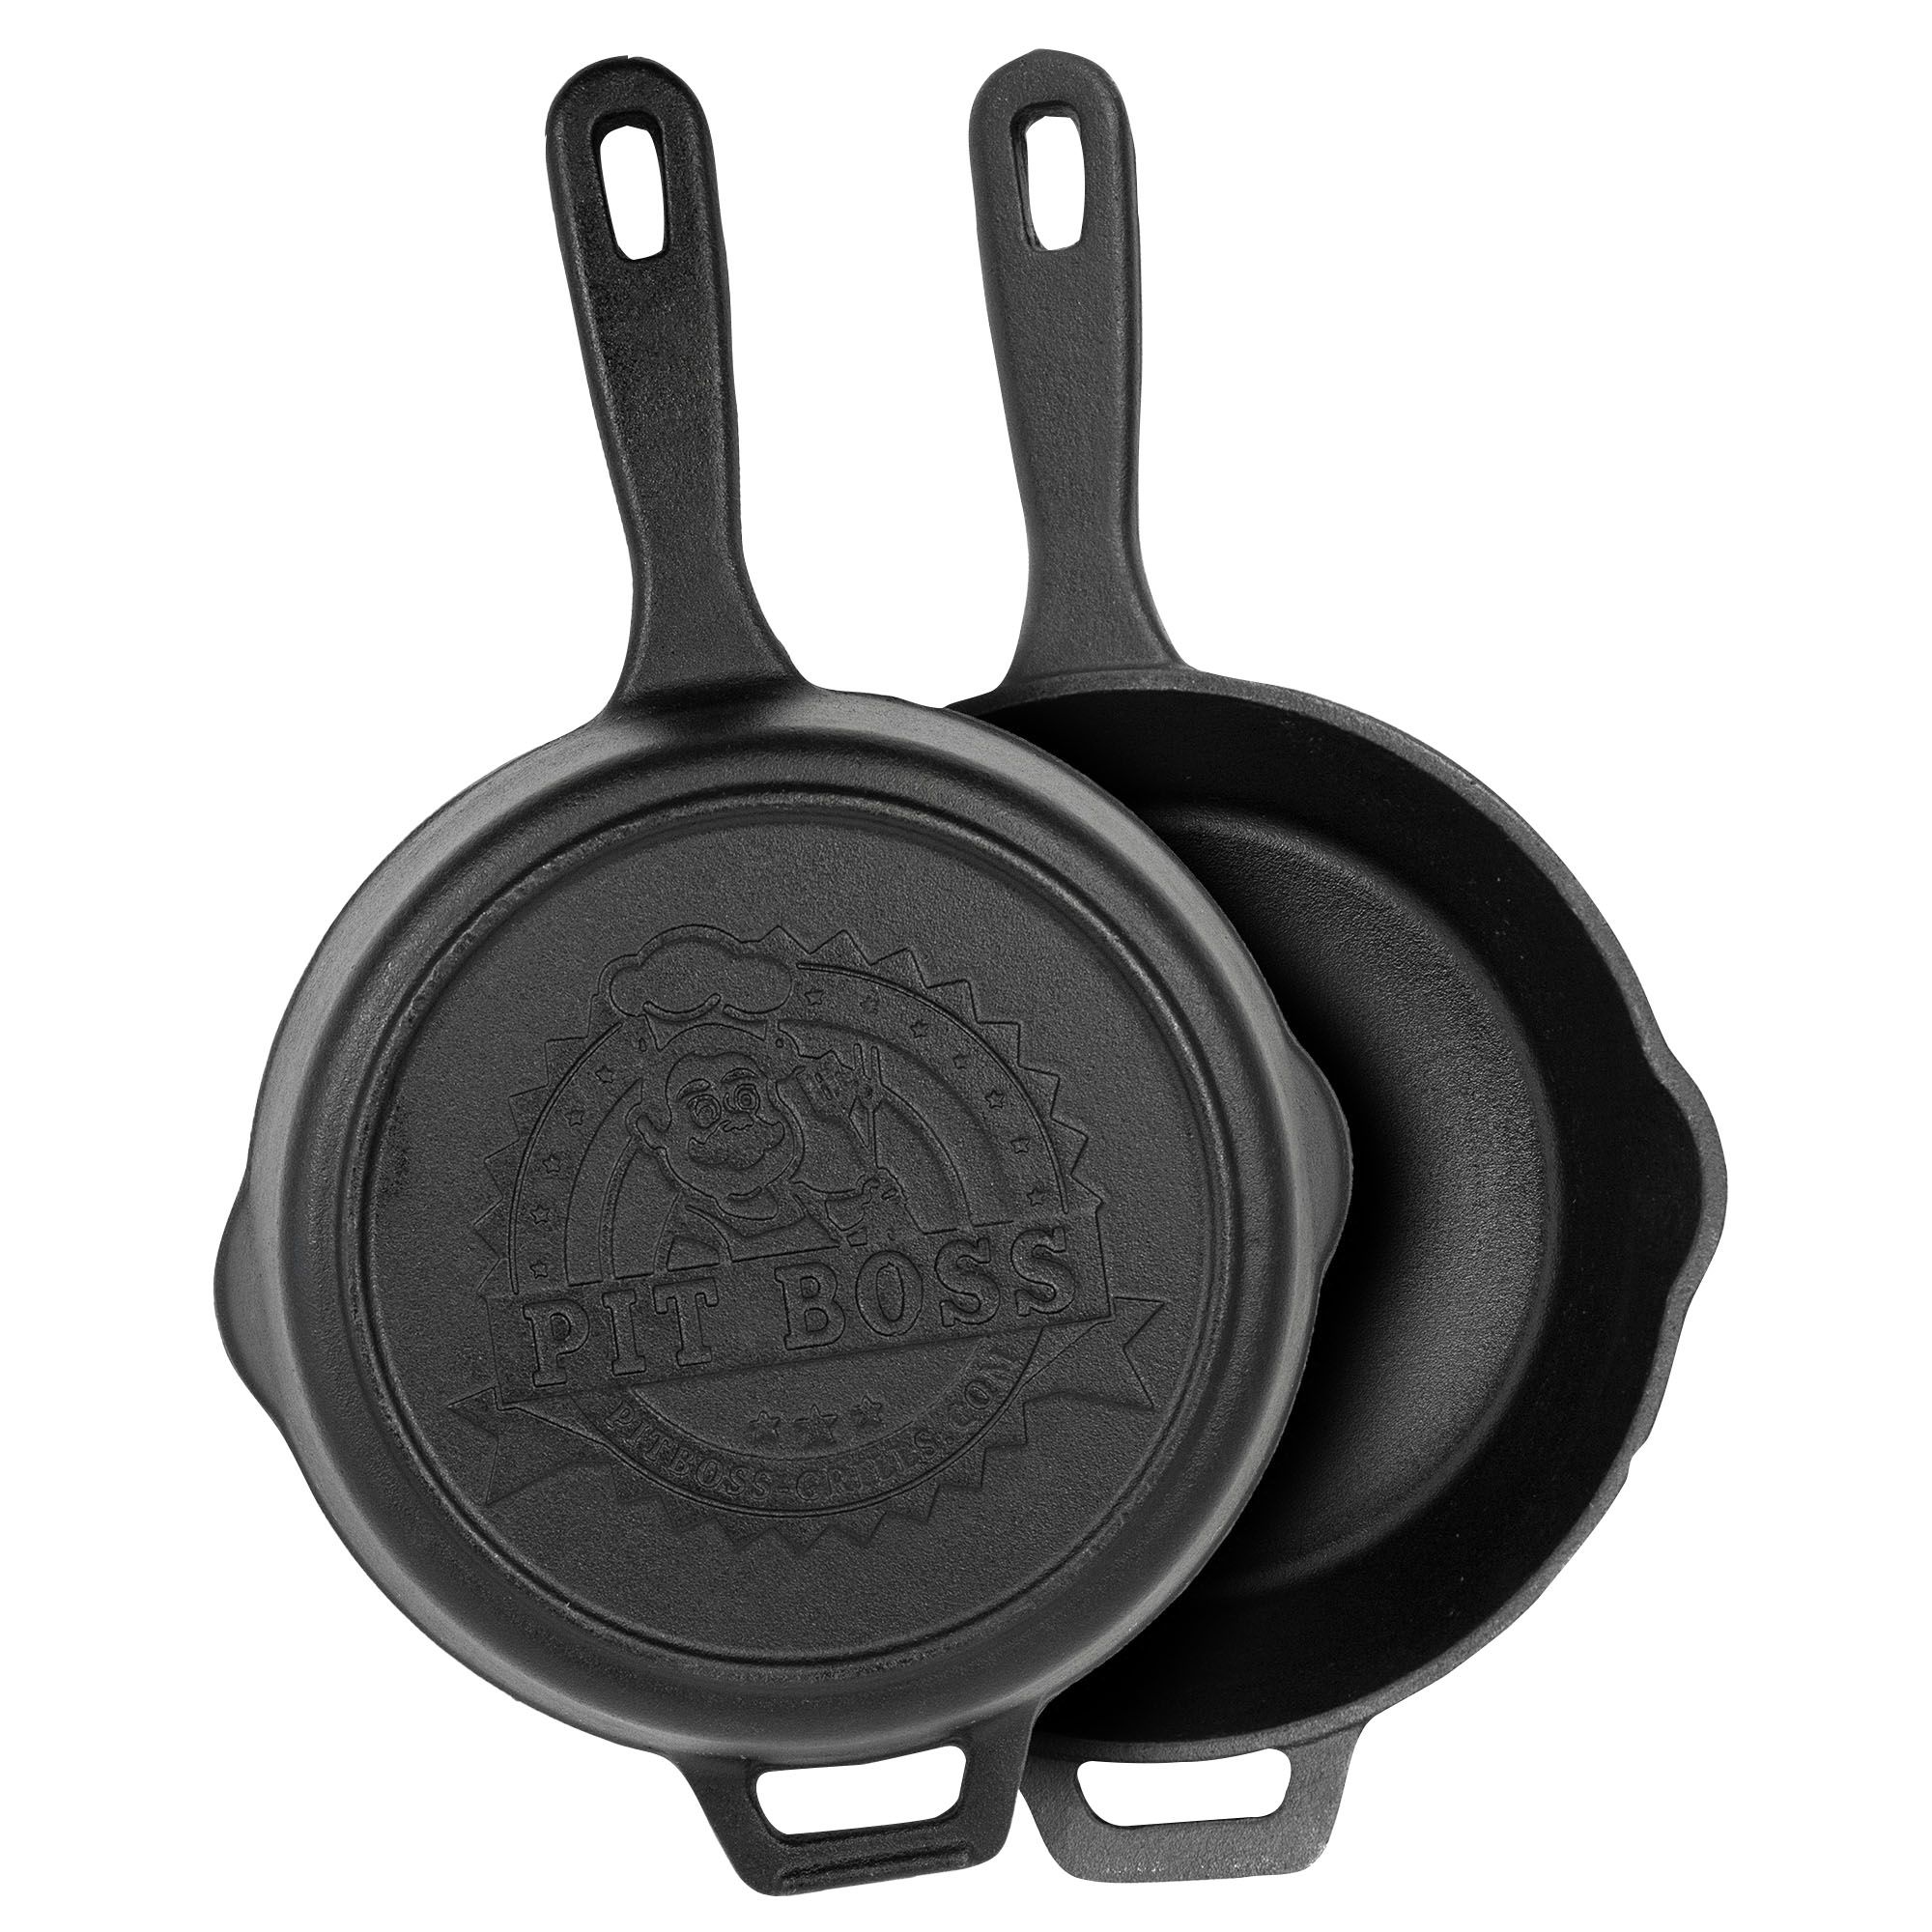 Lodge Cast-Iron Covered Deep Skillet